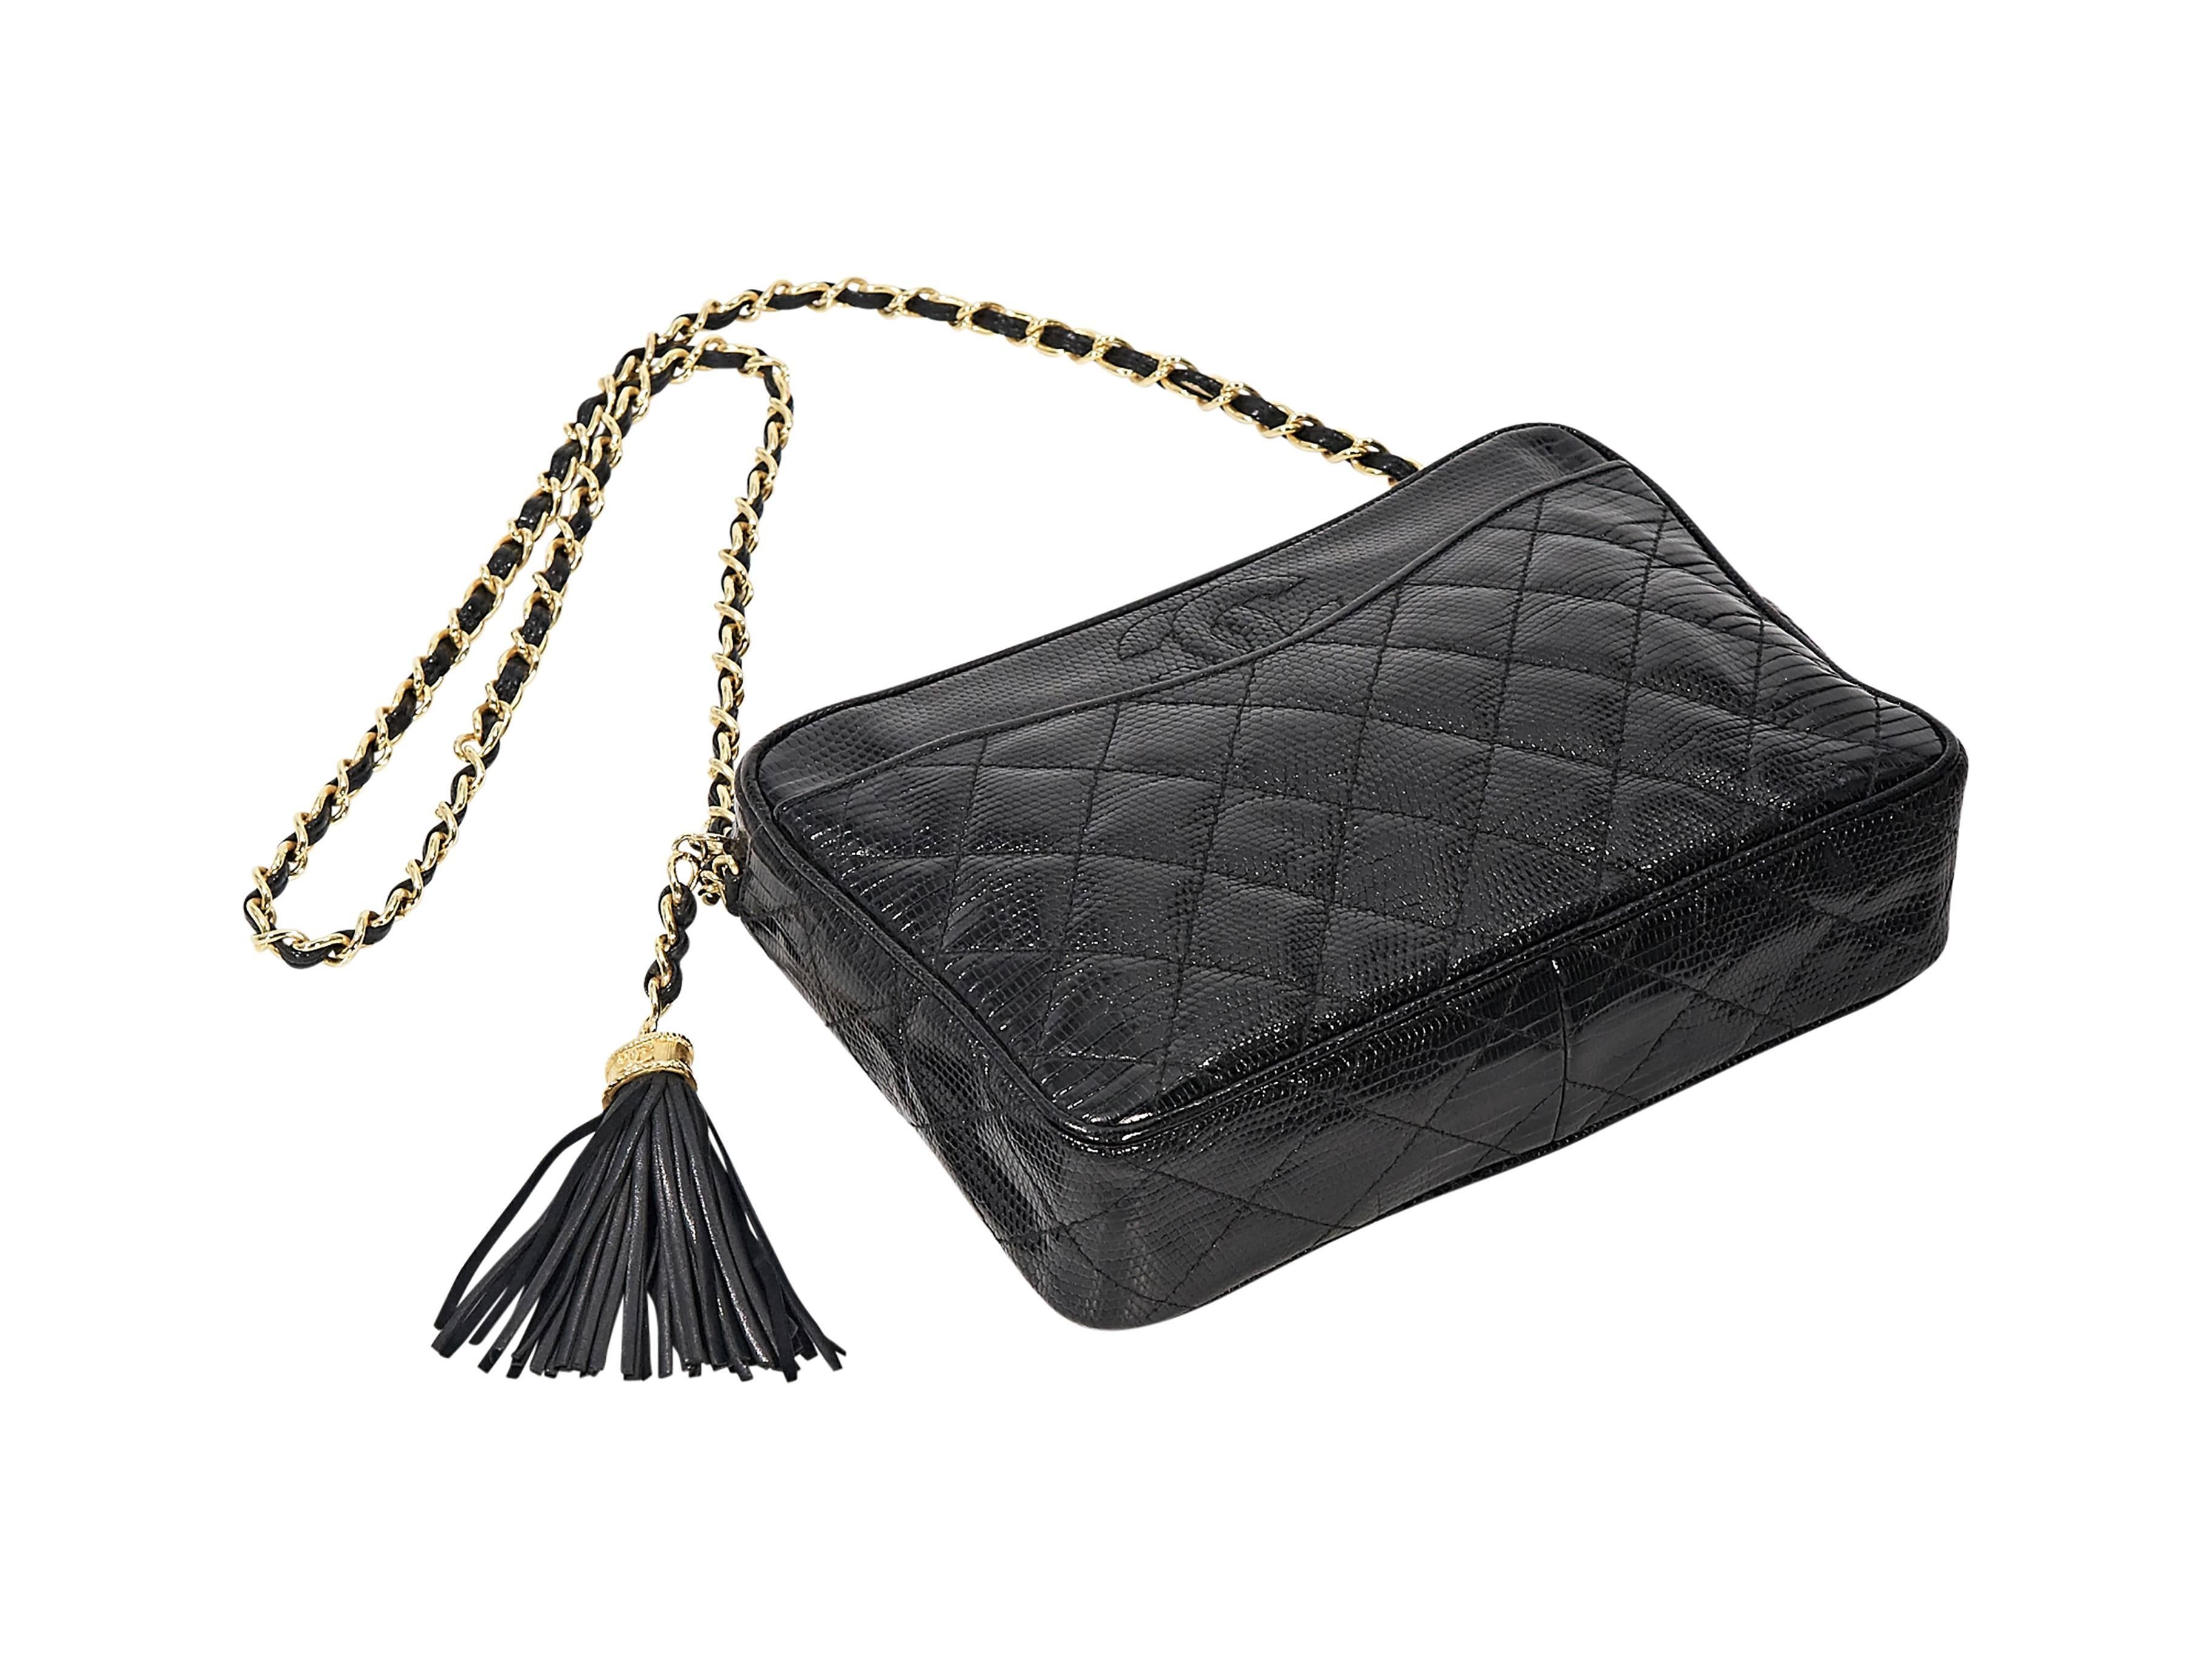 Product details:  Vintage black quilted lizard crossbody bag by Chanel.  Leather woven chain crossbody strap.  Top zip closure.  Tassel accent.  Leather lined interior with inner zip pocket.  Goldtone hardware.  9